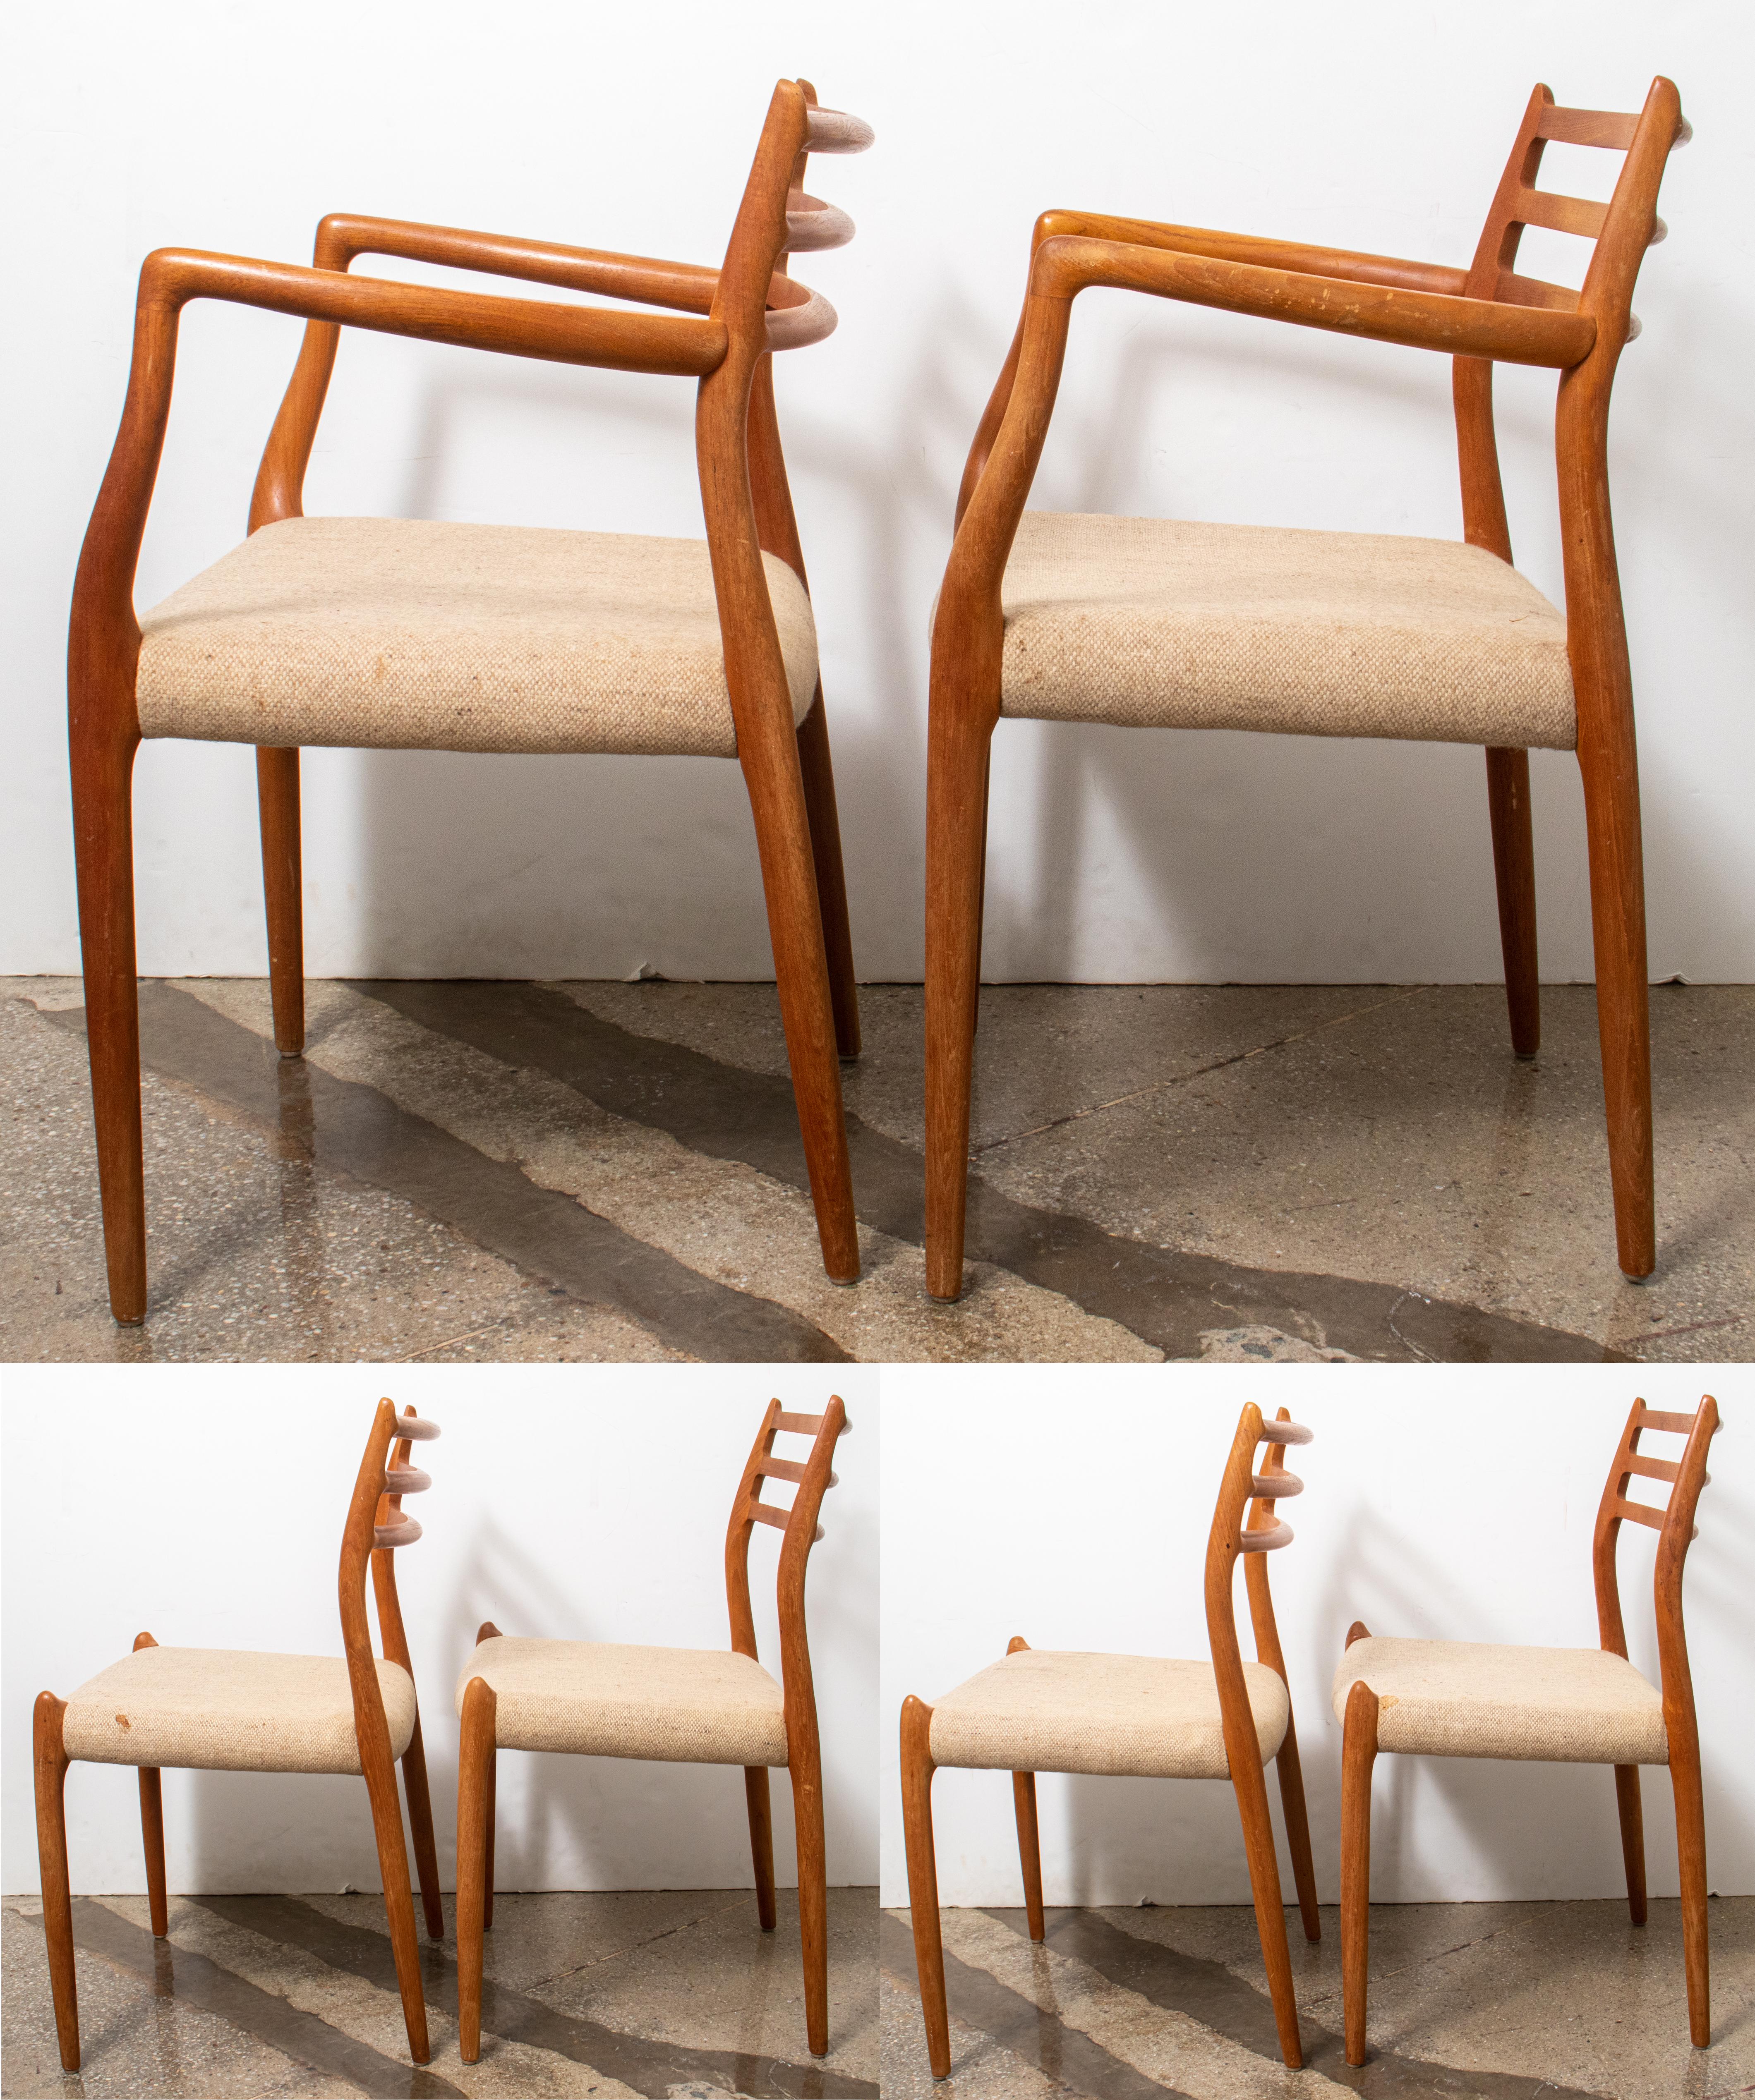 Upholstery Niels Moller Danish Modern Dining Chairs, 6